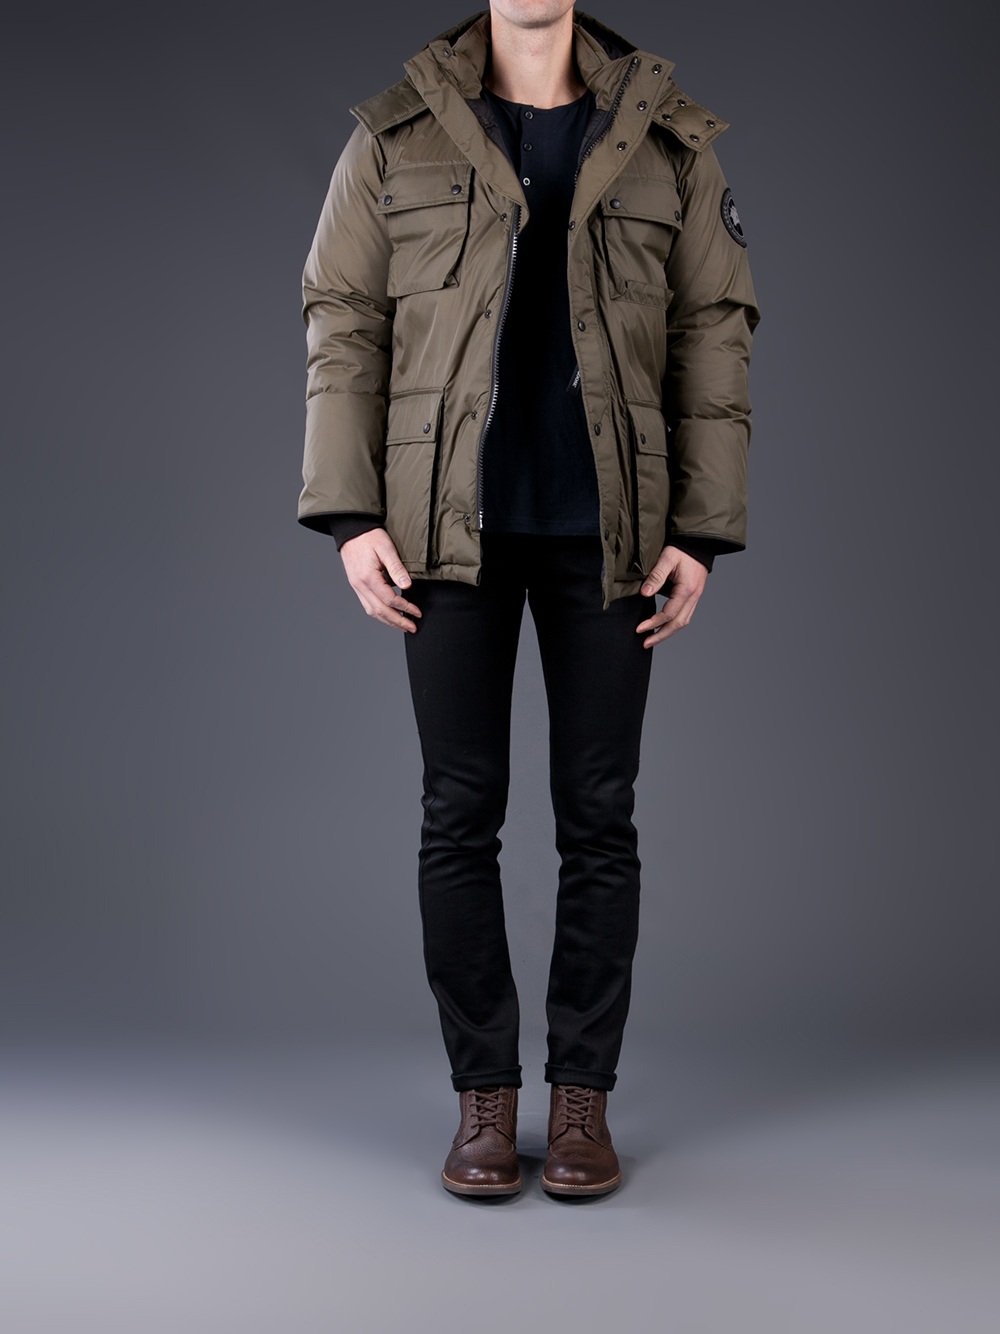 Canada Goose Manitoba Jacket in Green for Men - Lyst